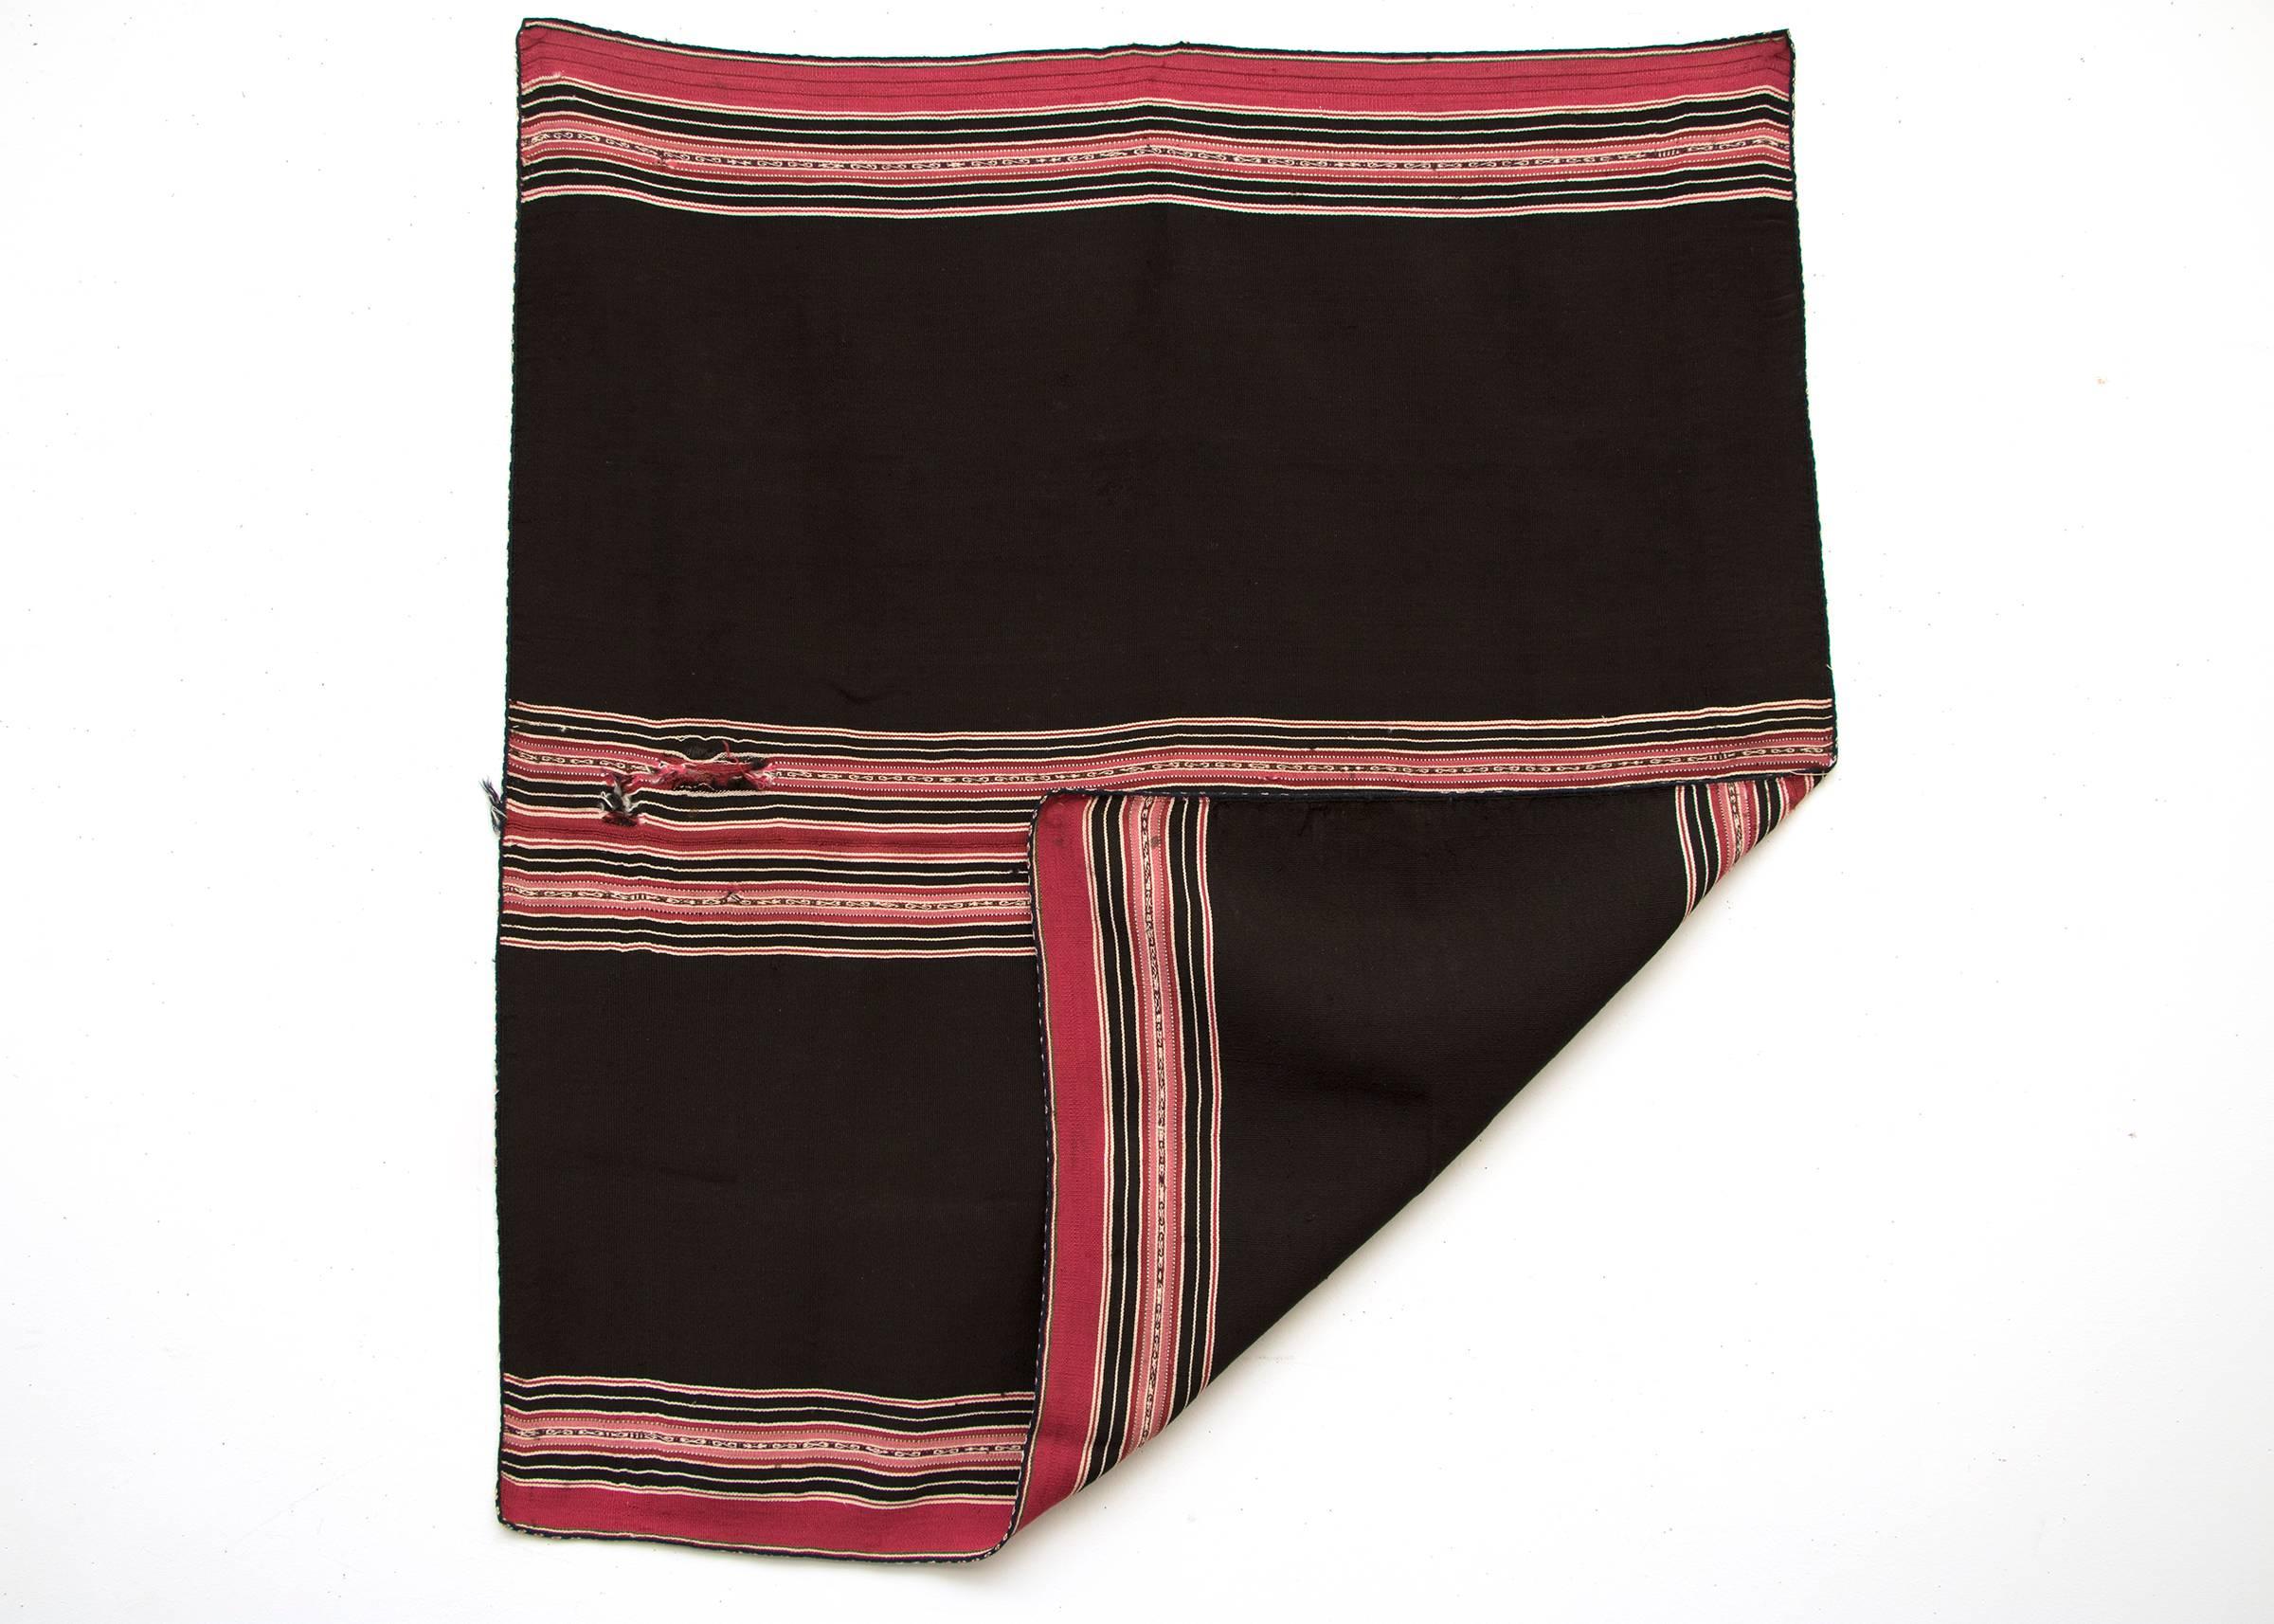 Antique Bolivian textile Beautifully woven of Camelid wool with natural dyes, originating from the Aymara culture, Bolivia, mid-19th Century.

